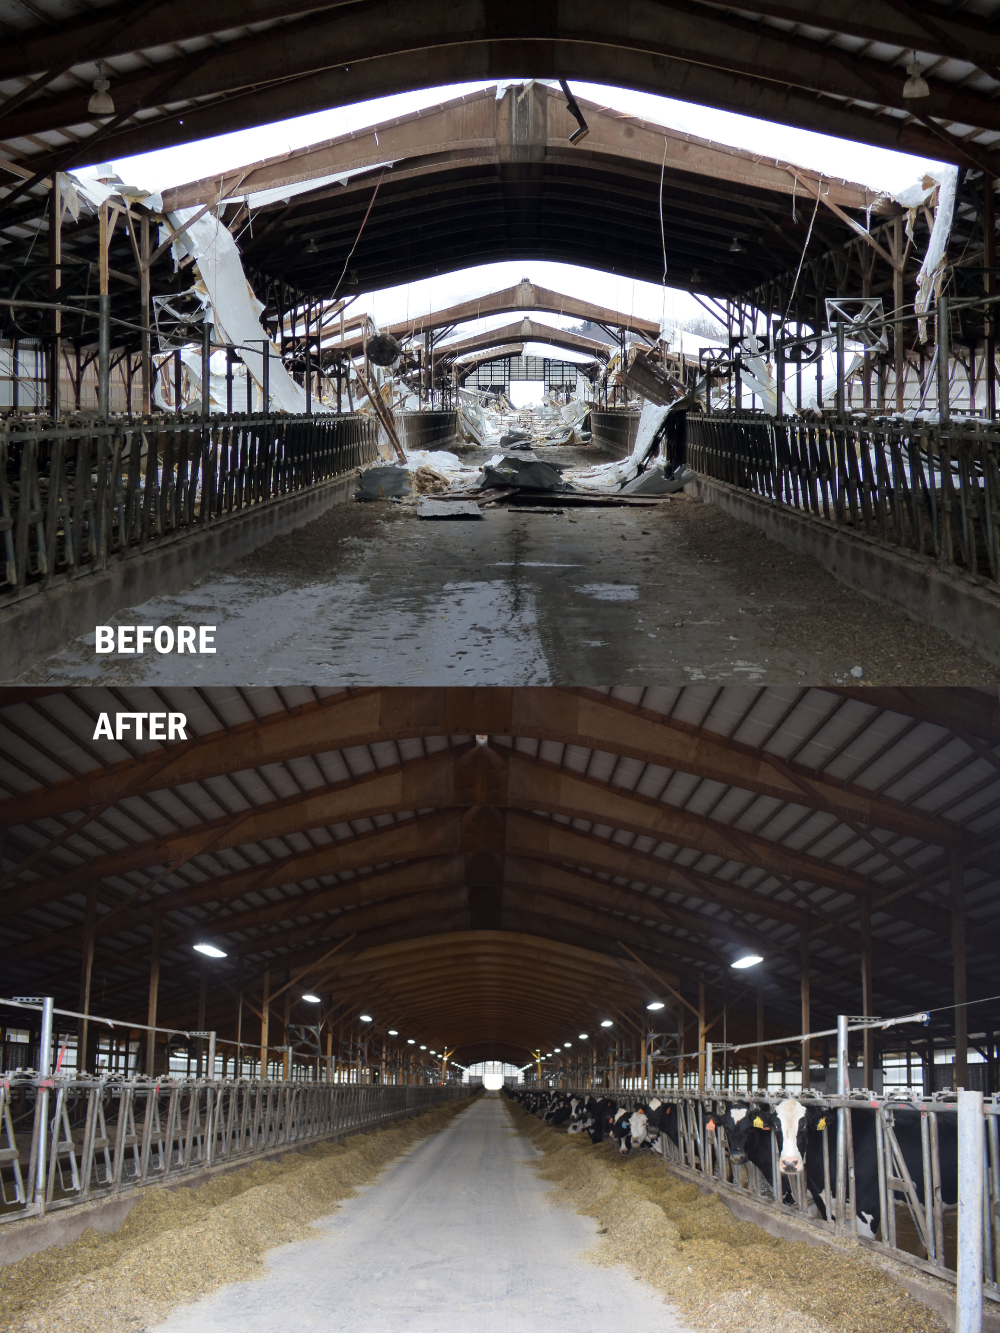 Two photos taken from inside are side by side, with the top image reading "BEFORE" in white letters and the lower image reading "AFTER". The top image shows a collapsed roof and severe damage to the barn. The bottom image shows a functional roof and in-use barn with cows. 